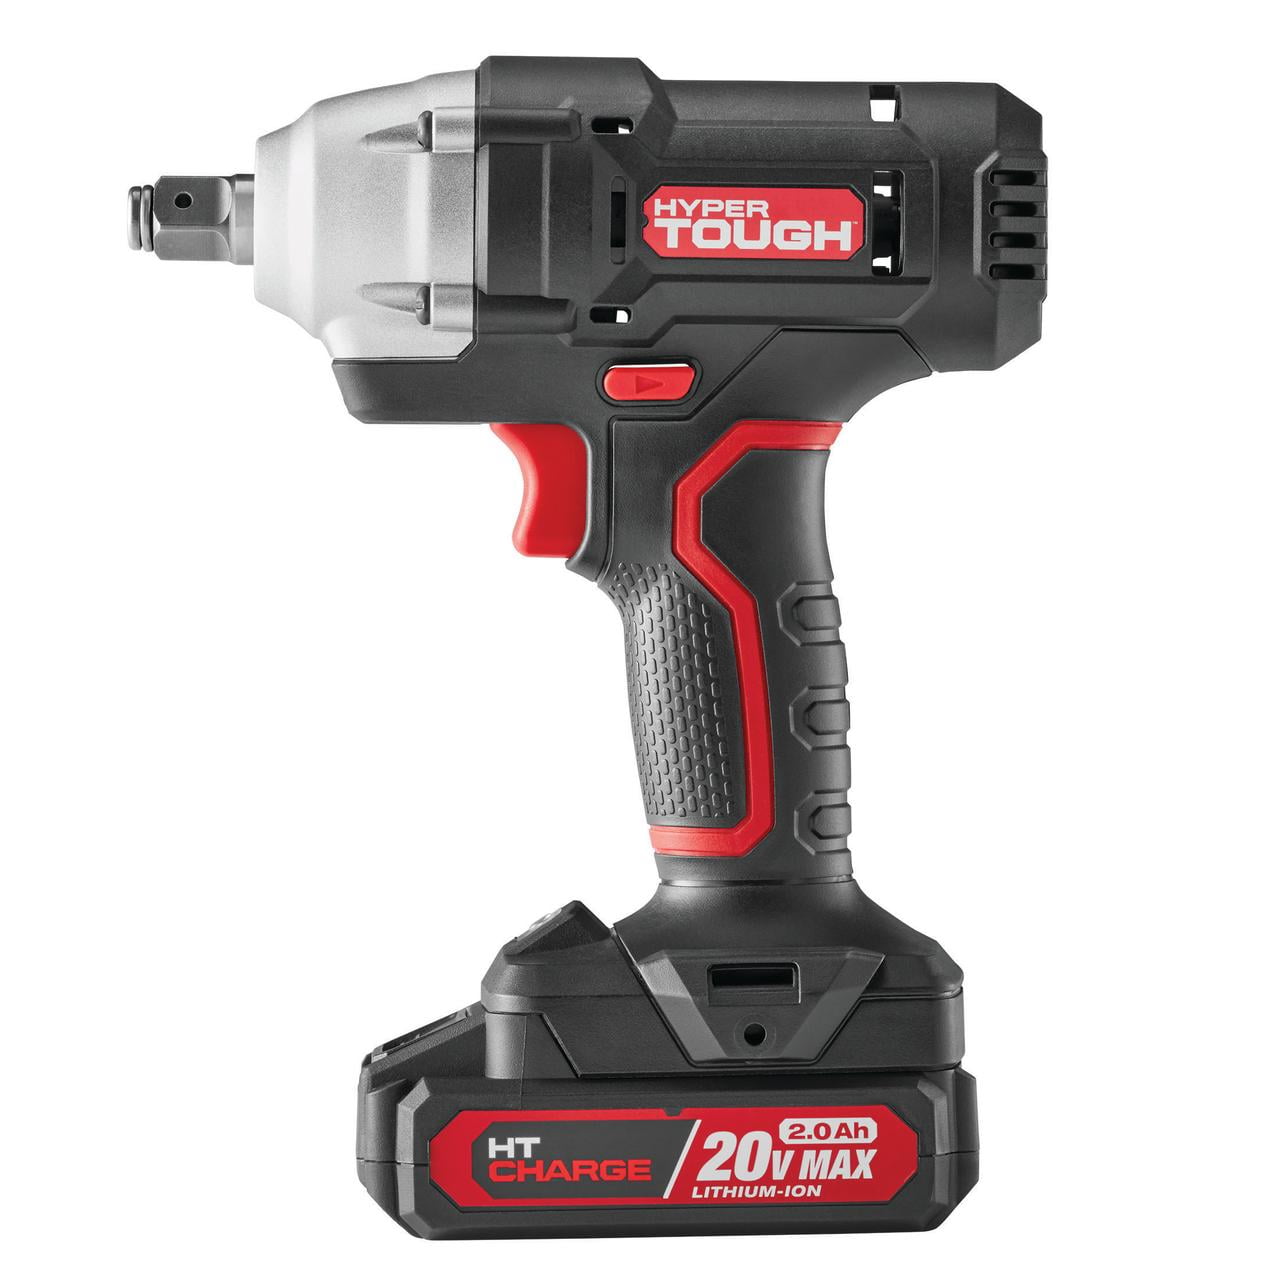 Hyper Tough 20 V Cordless 1/2-inch Impact Wrench with 2.0 Ah Battery and  Charger